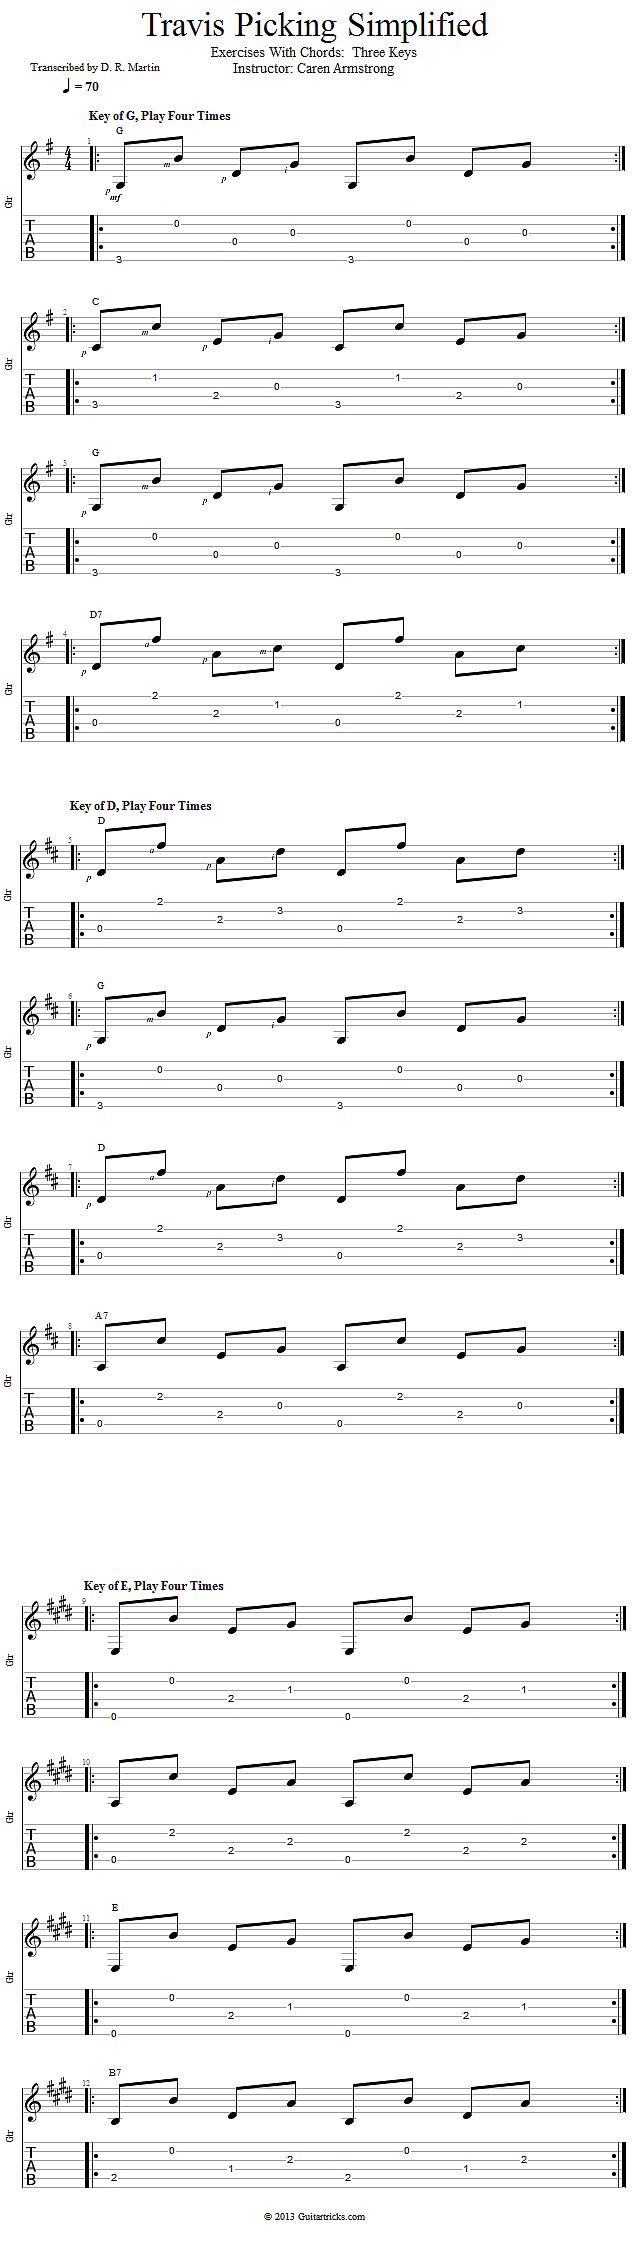 Exercises With Chords: Three Keys song notation